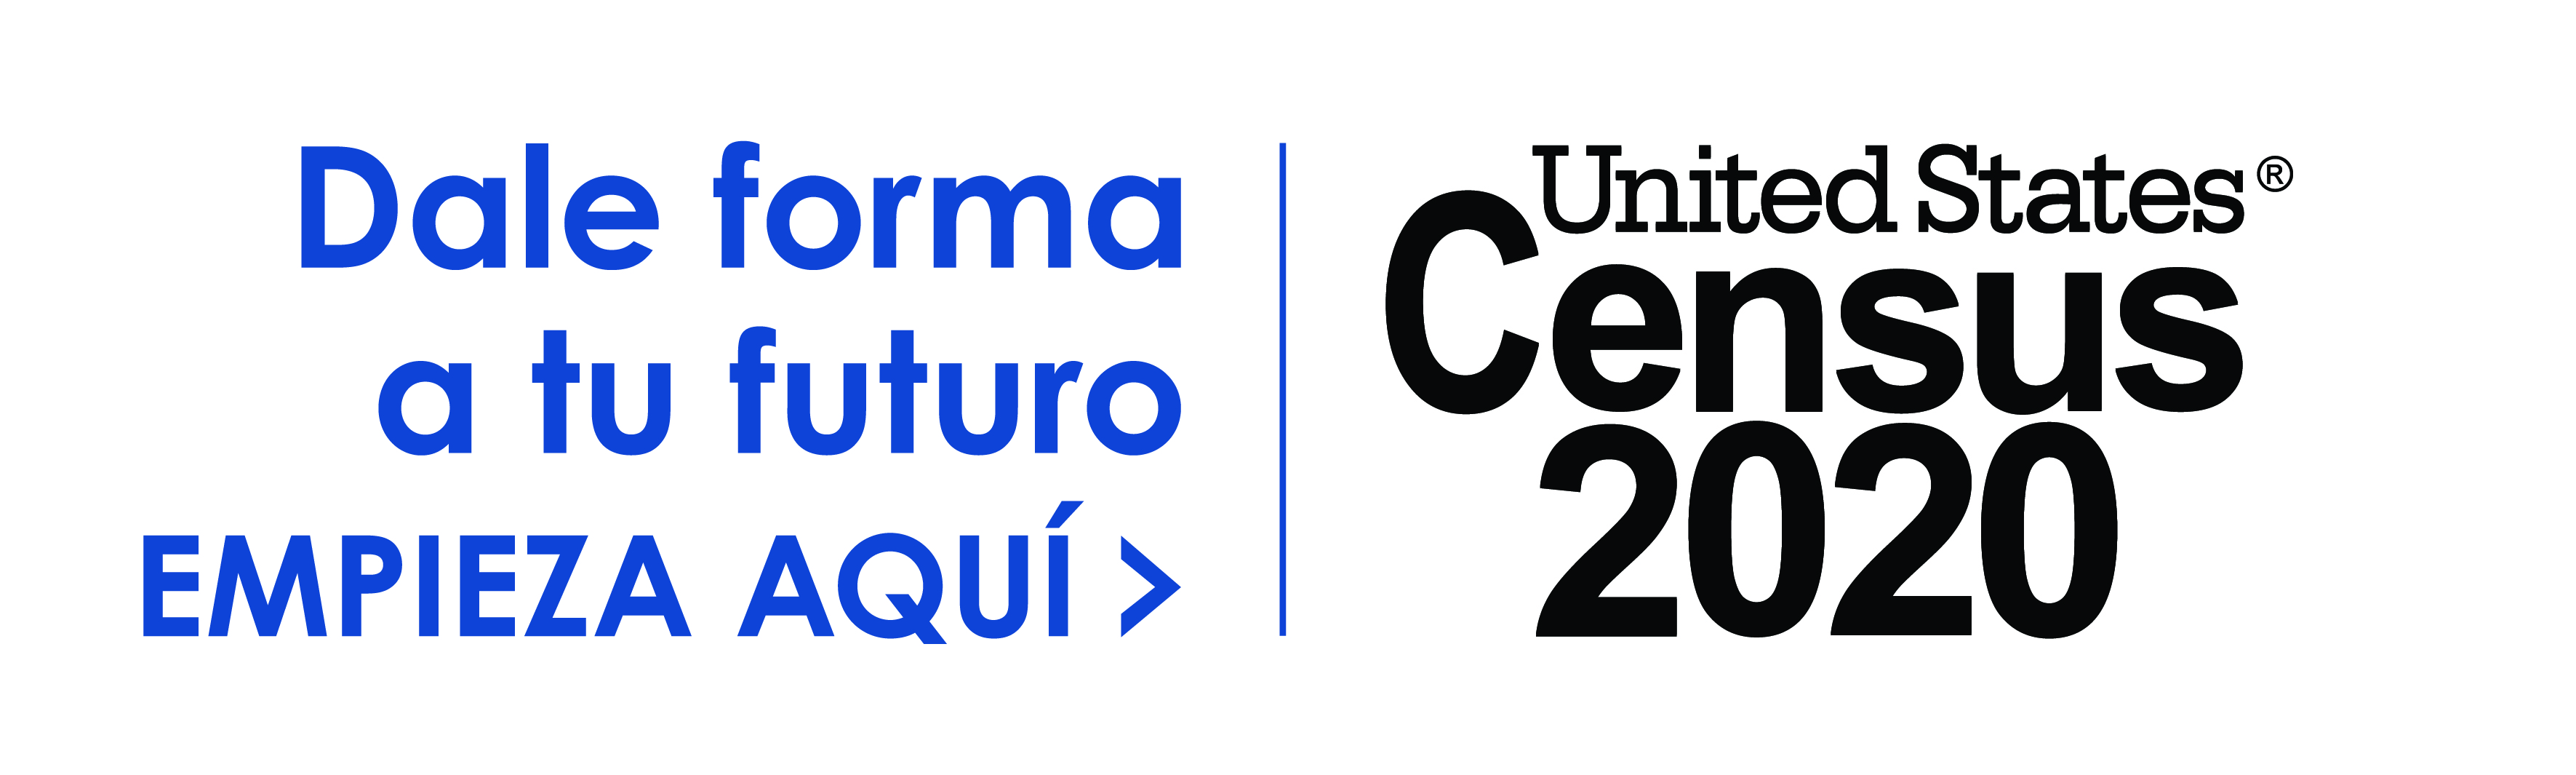 United States Census 2020 Logo which includes the tagline "Shape your future, Start Here."